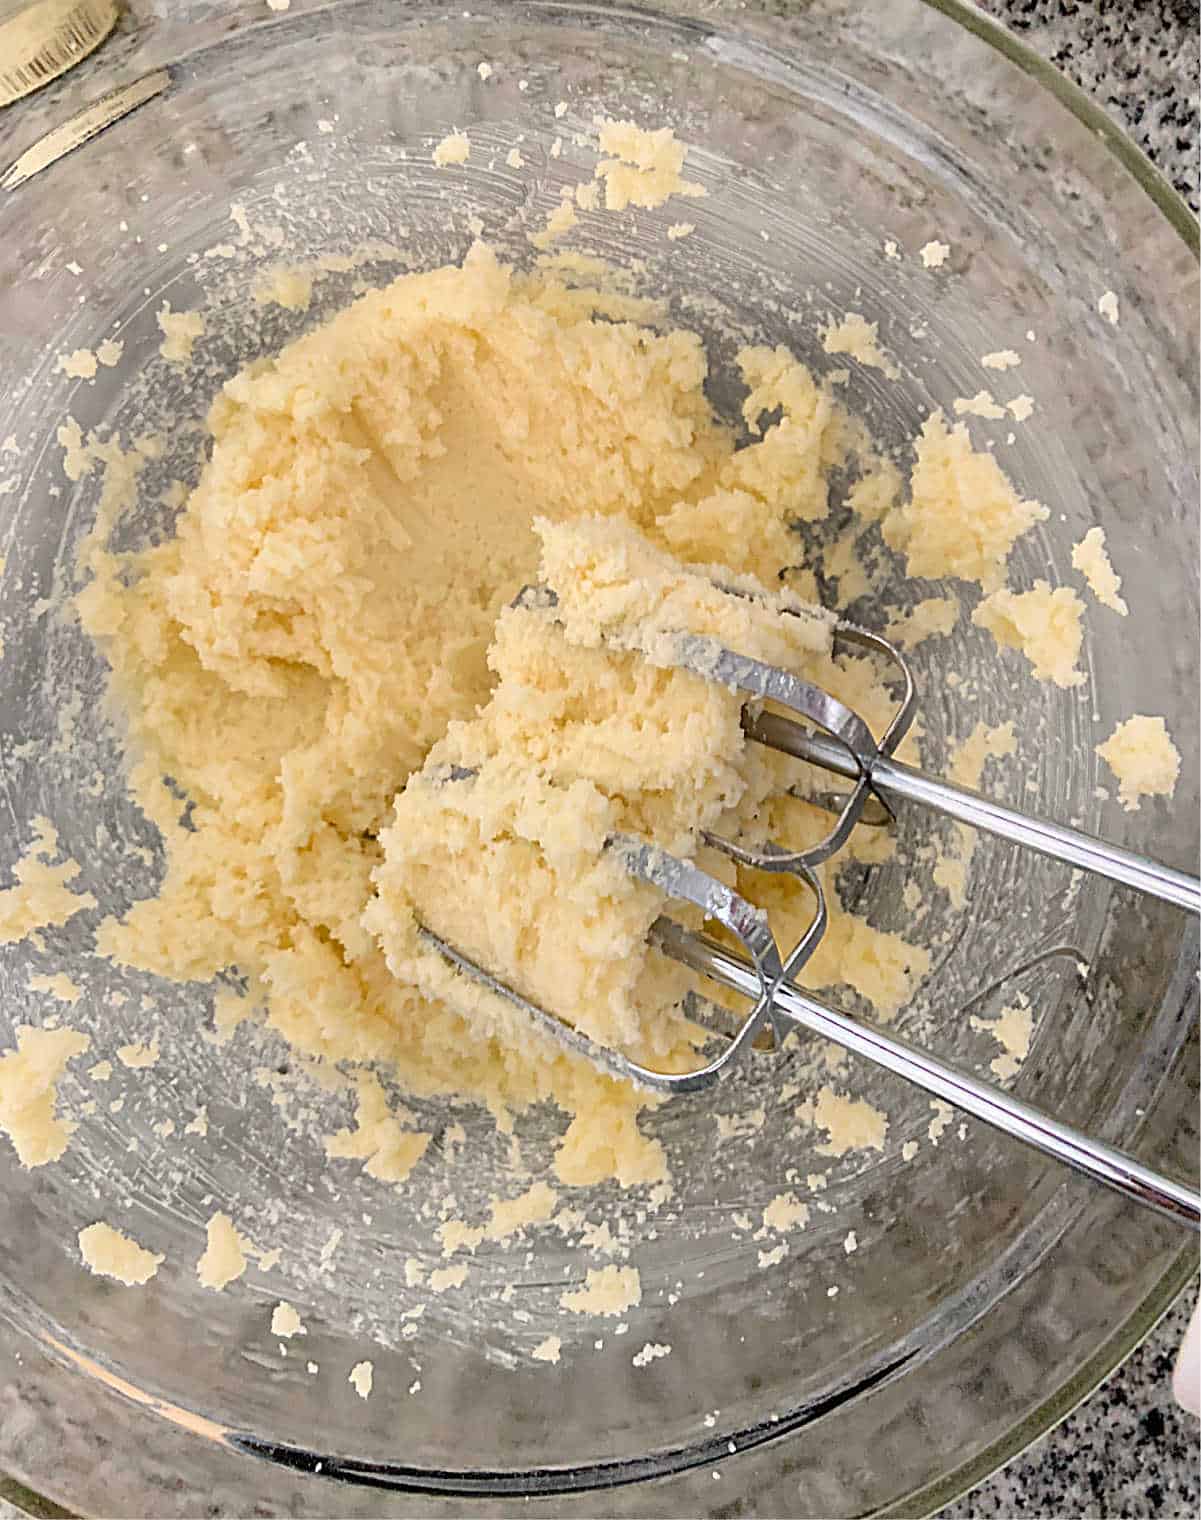 Cake batter in glass bowl with metal beaters inside